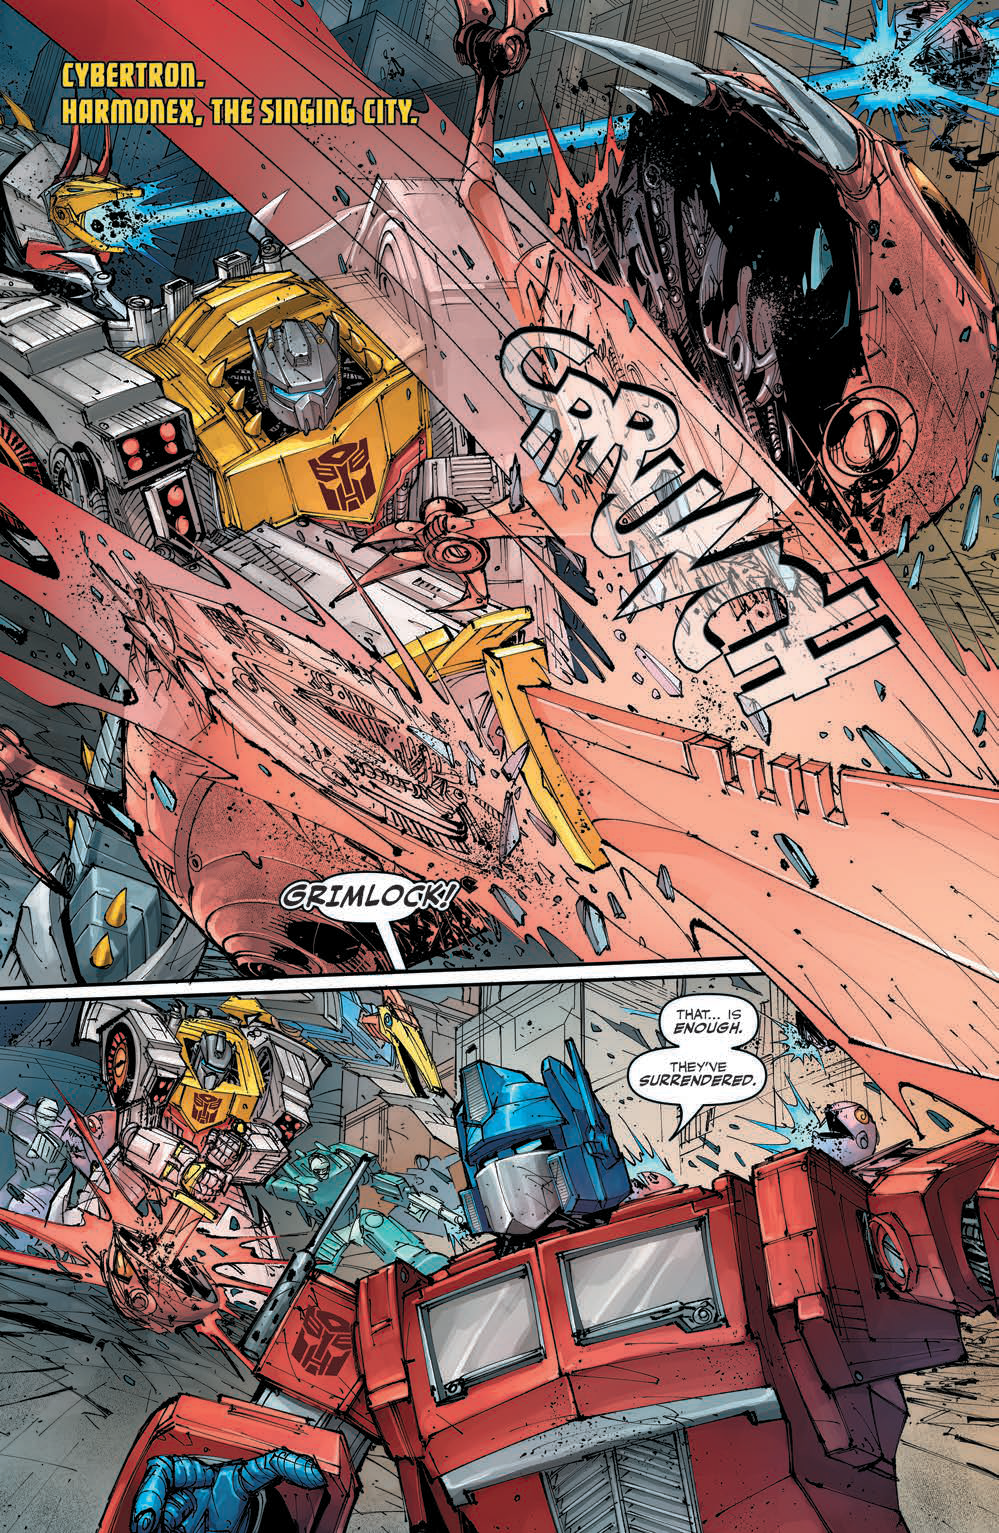 Review – Transformers Prime: Beast Hunters #6 (of 8) – BIG COMIC PAGE